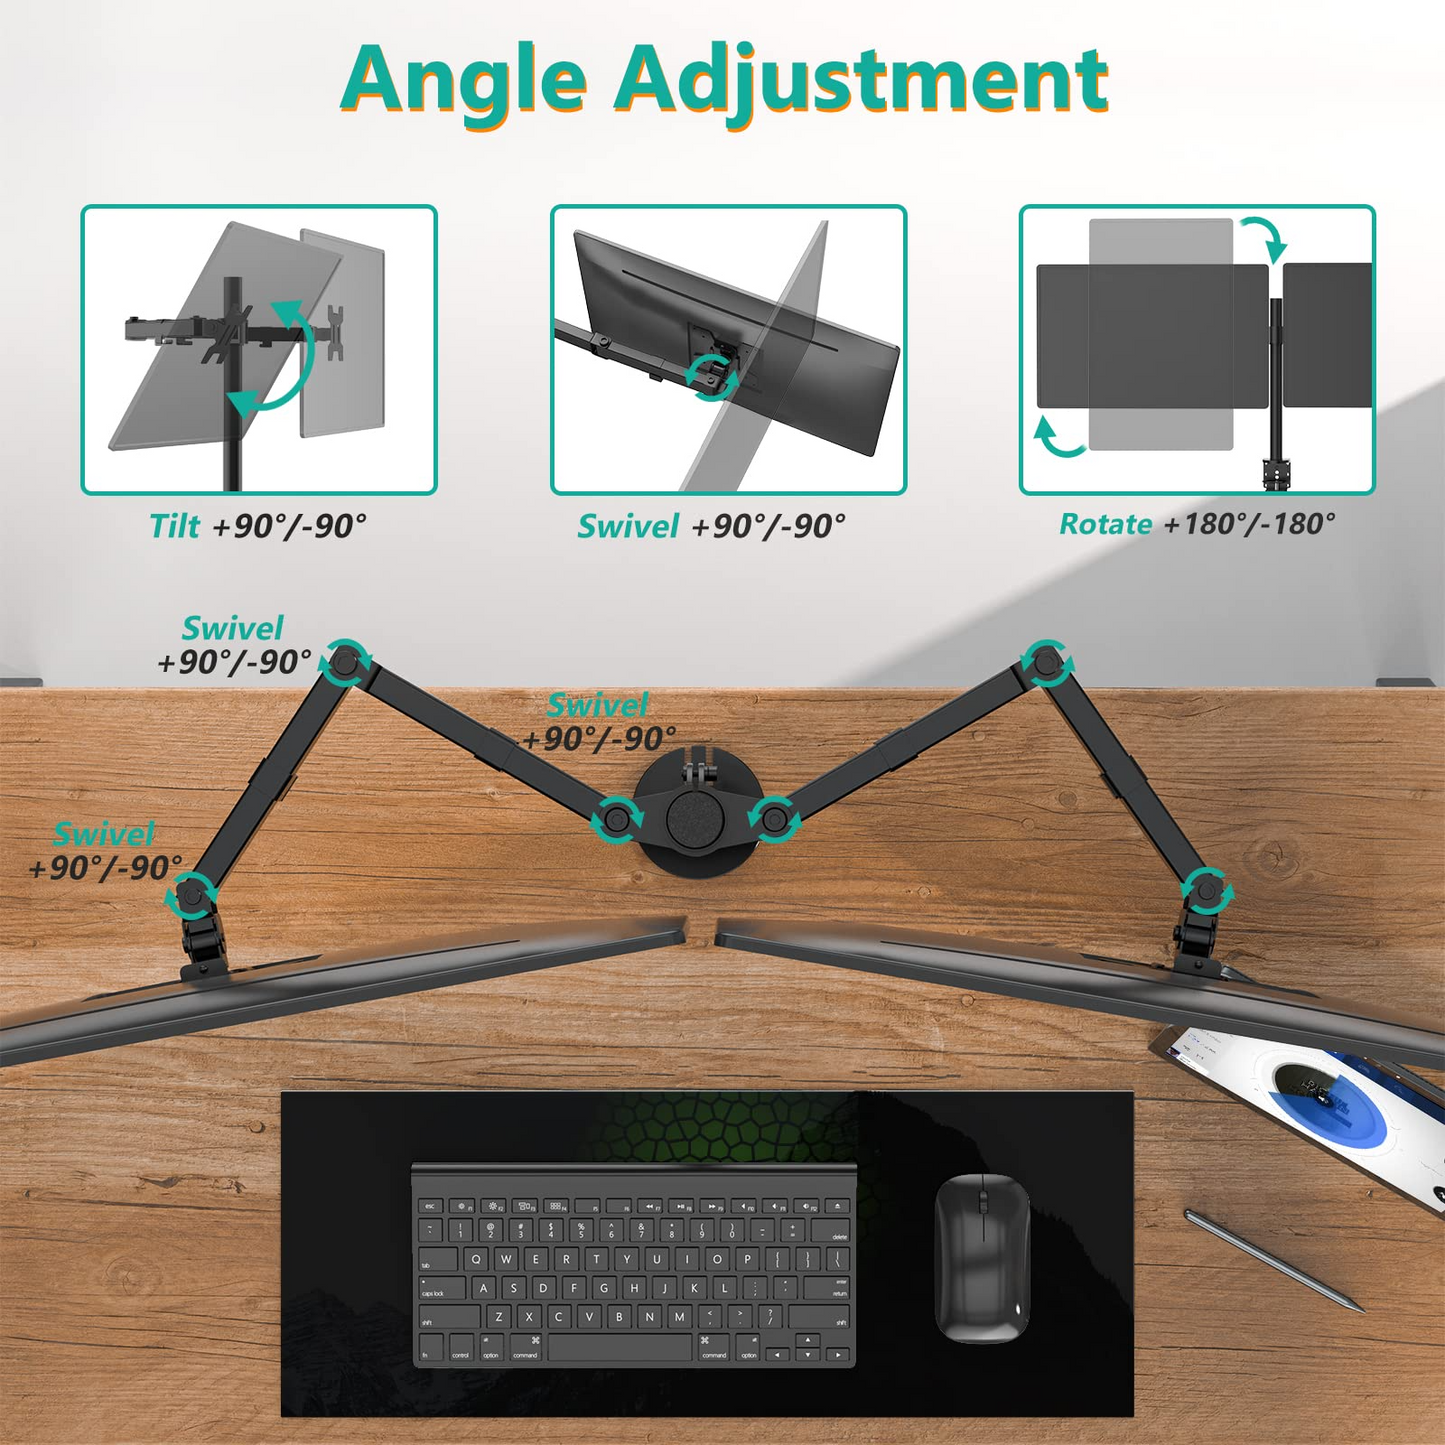 Dual LCD Monitor Fully Adjustable Desk Mount Stand Fits 2 Screens up to 27 inch, 22 lbs. Weight Capacity per Arm (M002)